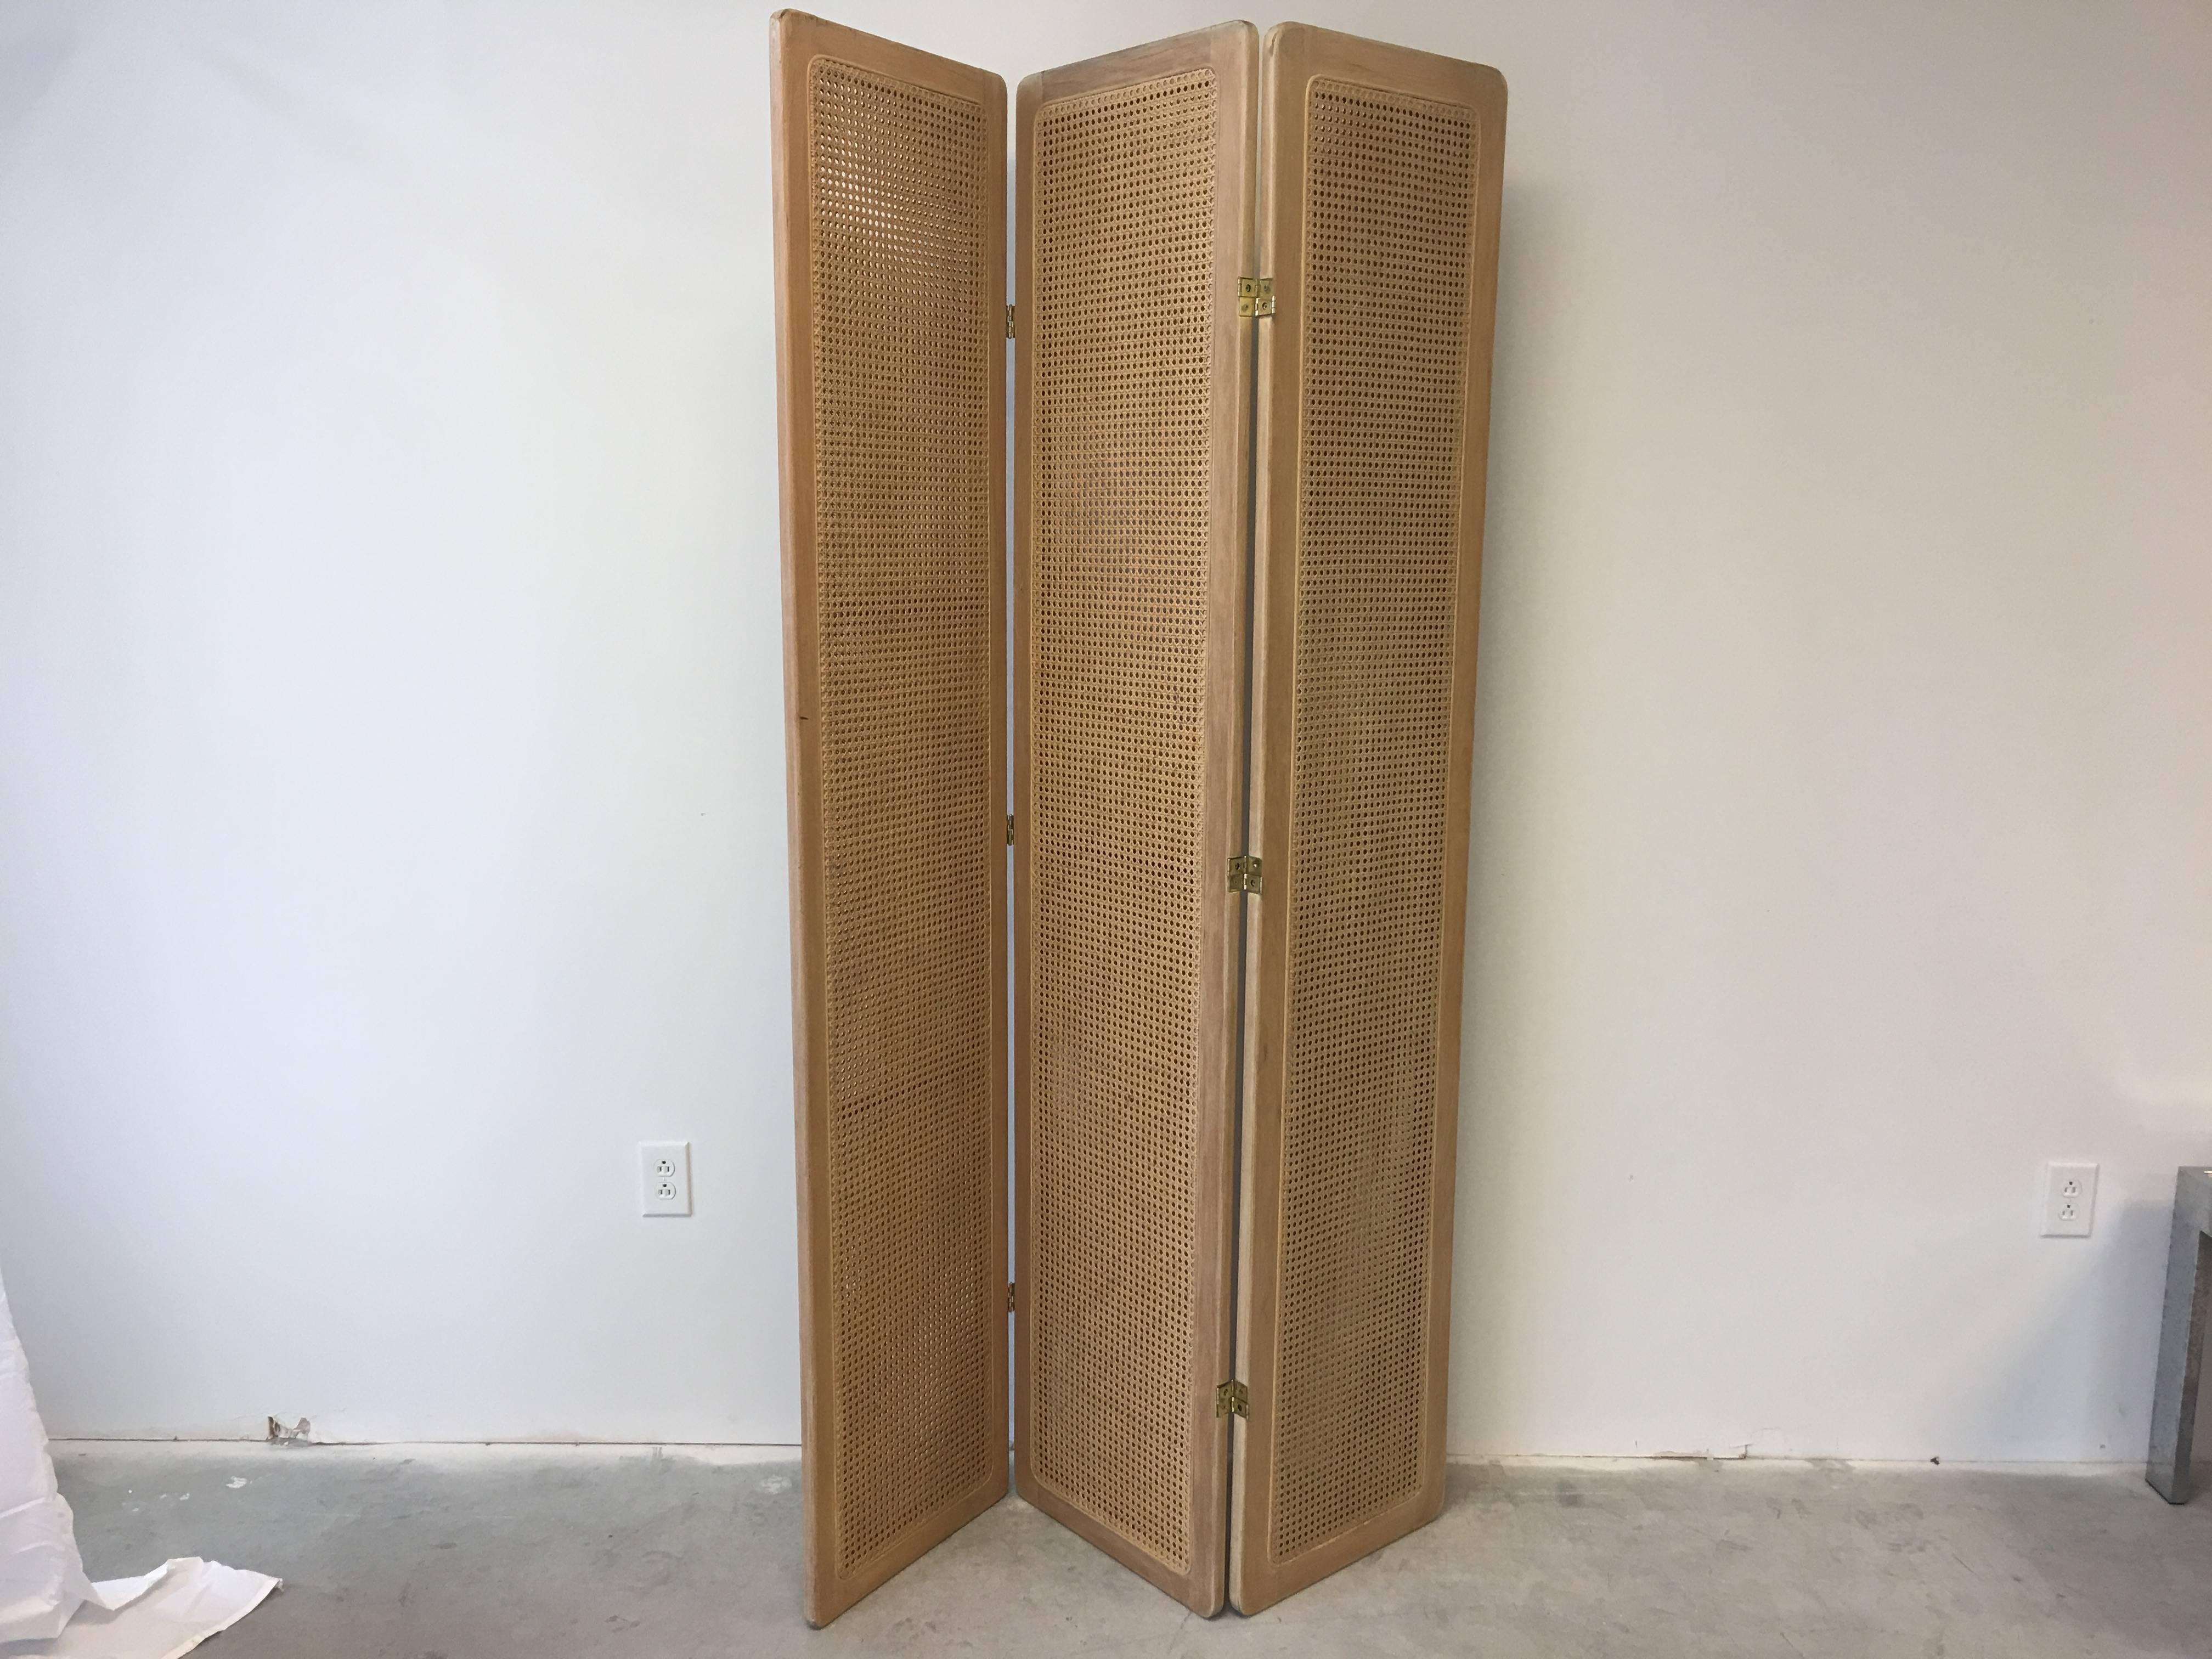 Offered is a stunning, 1950s Mid-Century Modern, Palm Beach styled three-panelled screen from woven cane and wood. 

Each panel measures 17